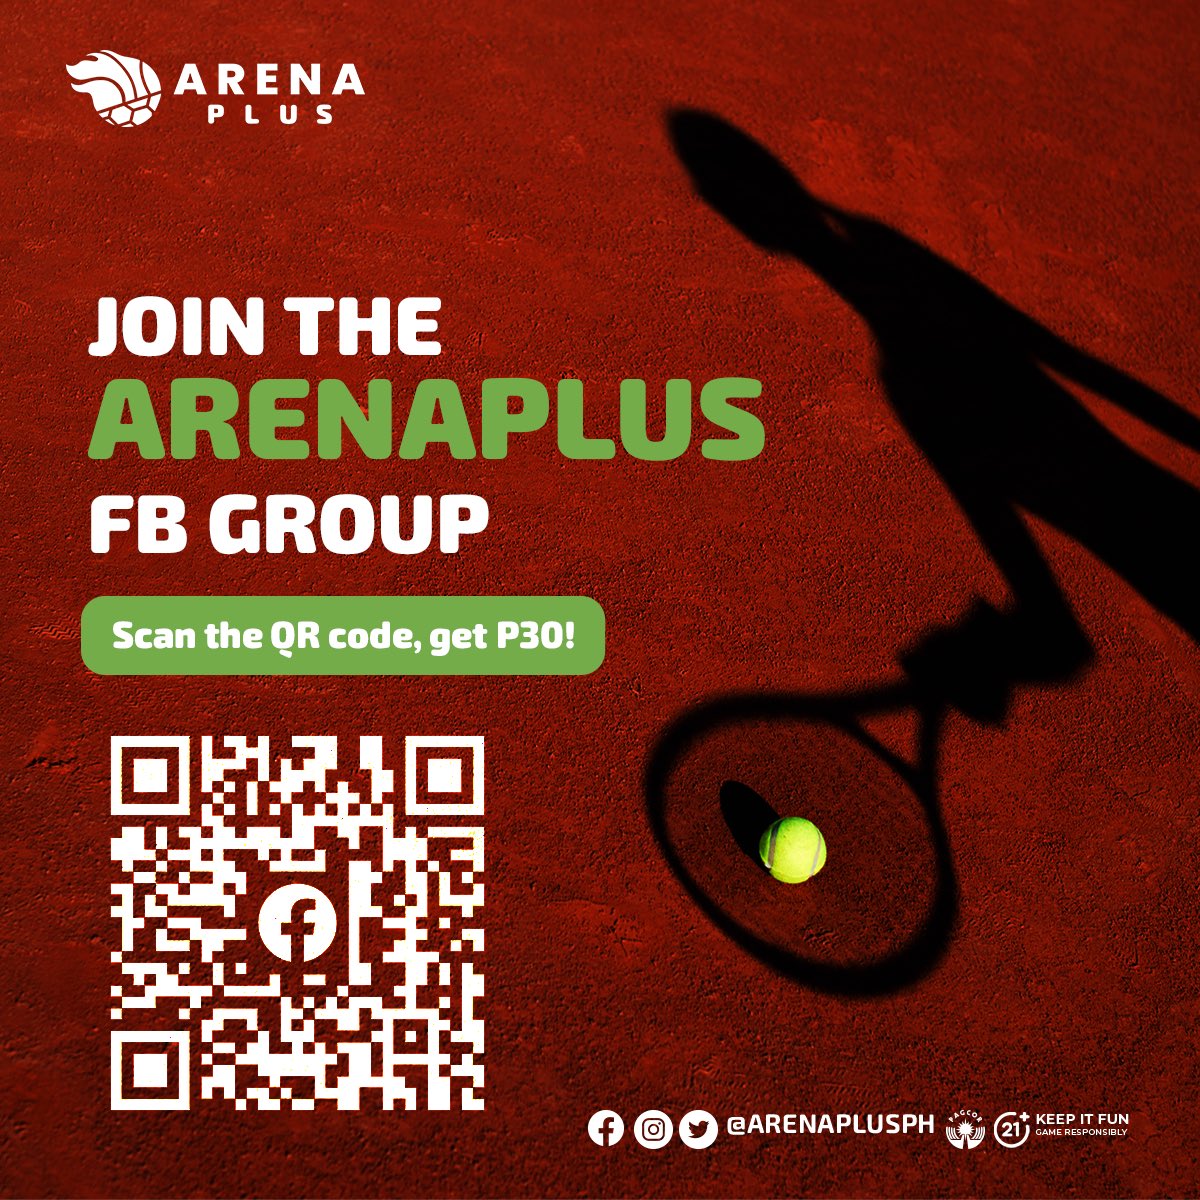 Maging ka-ArenaPlus na! Join our official FB group by scanning the QR code, and get P30 when you do! 😍

Samahan na ang mga astig sa sports in our growing community! 🤳

#ArenaPlusPH #AstigSaSports #sportsbetting #sportsbook #onlinebetting #sports #nba #basketball #football #ufc…